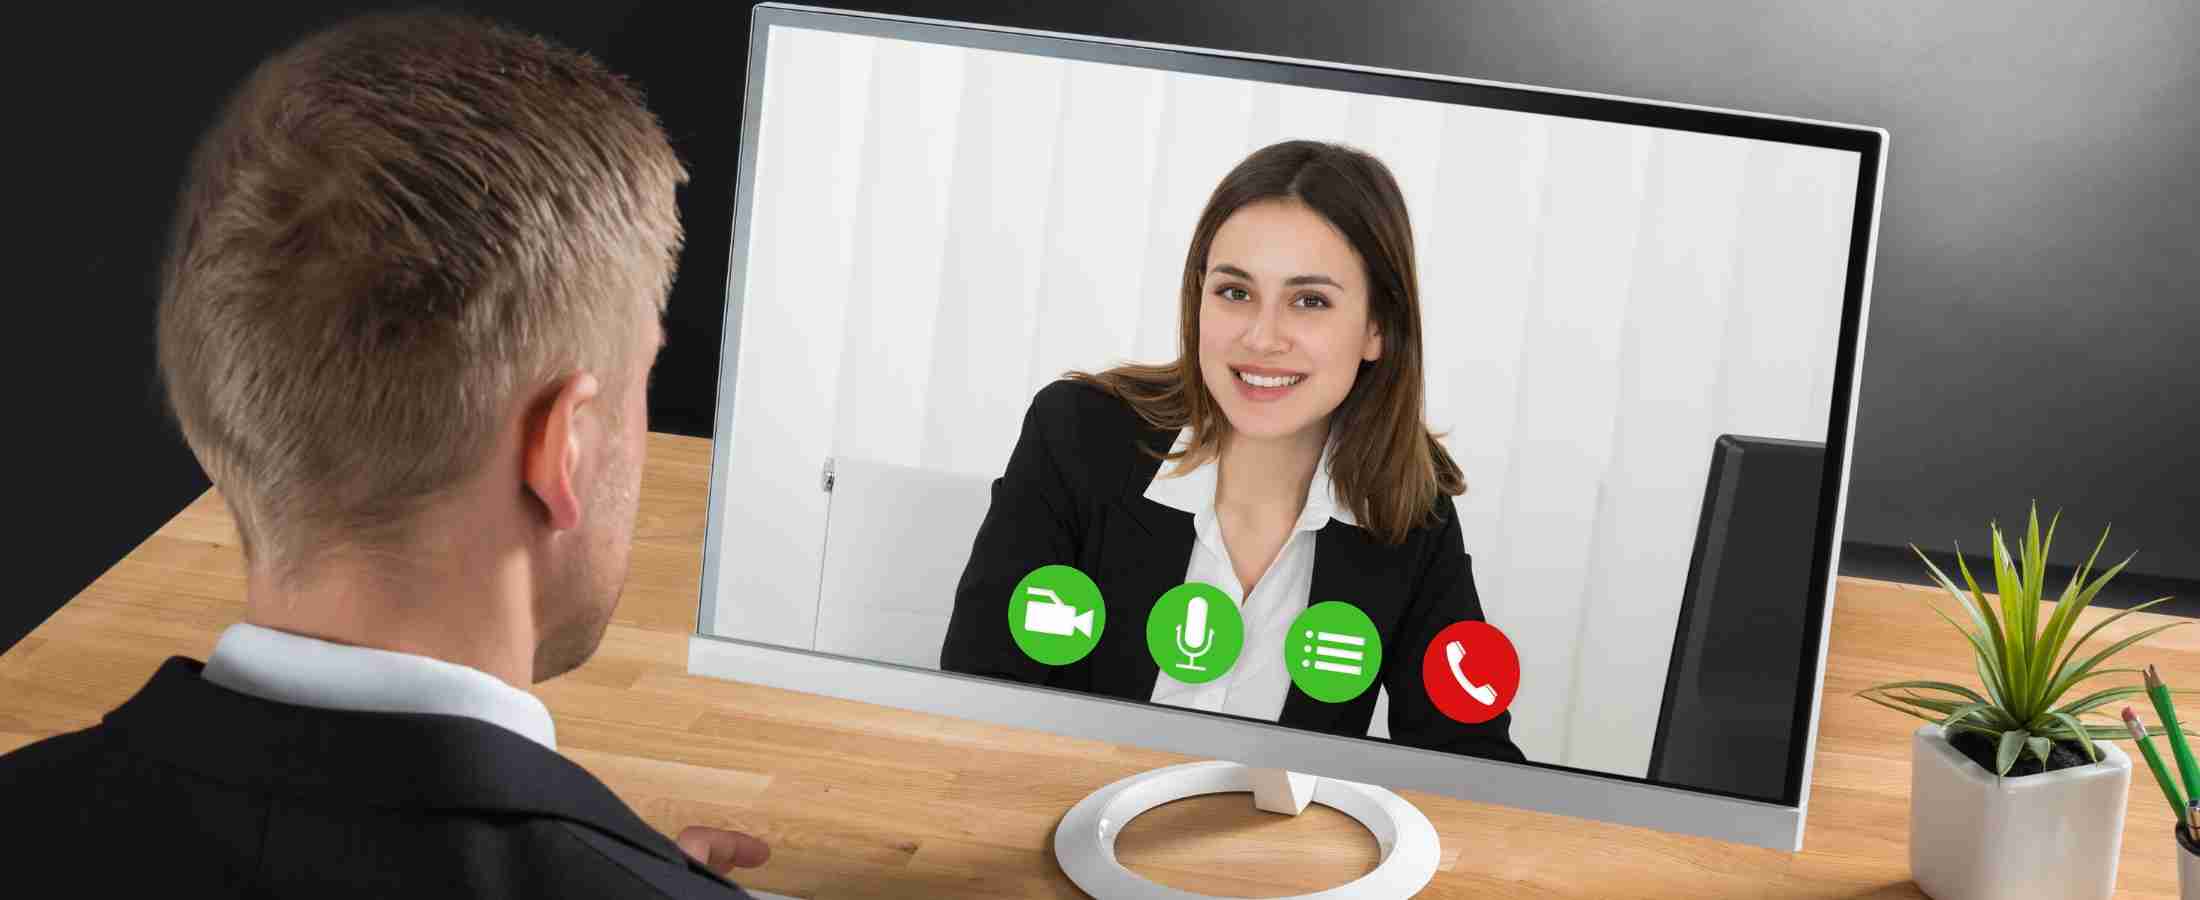 Video Interviewing 101—For Hiring Managers – Elev8 Hire Solutions